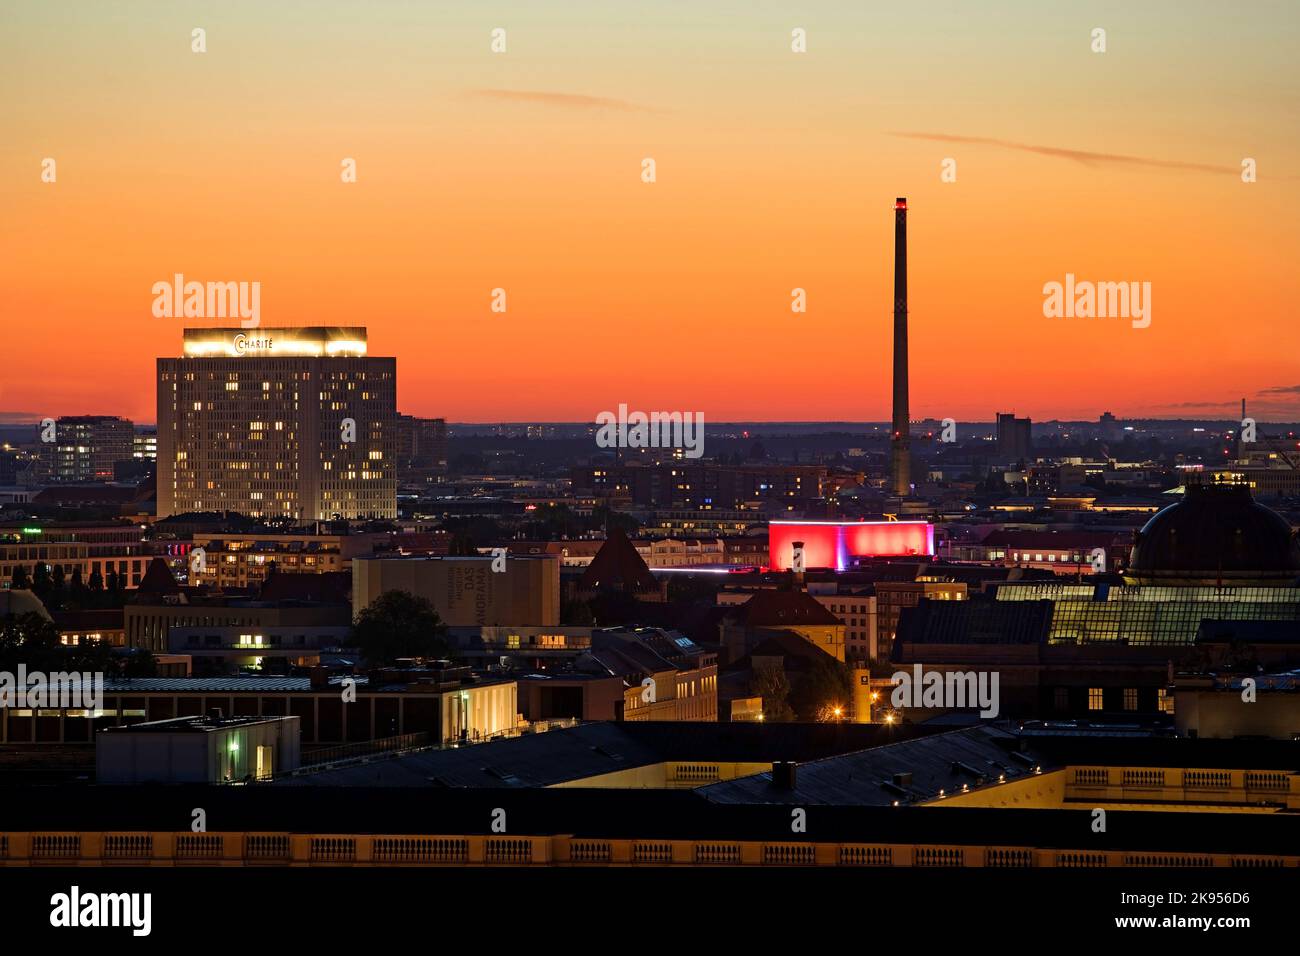 Charite University Hospital and stack of the combined heat and power plant Scharnhorststrasse in the sunset, Germany, Berlin Stock Photo